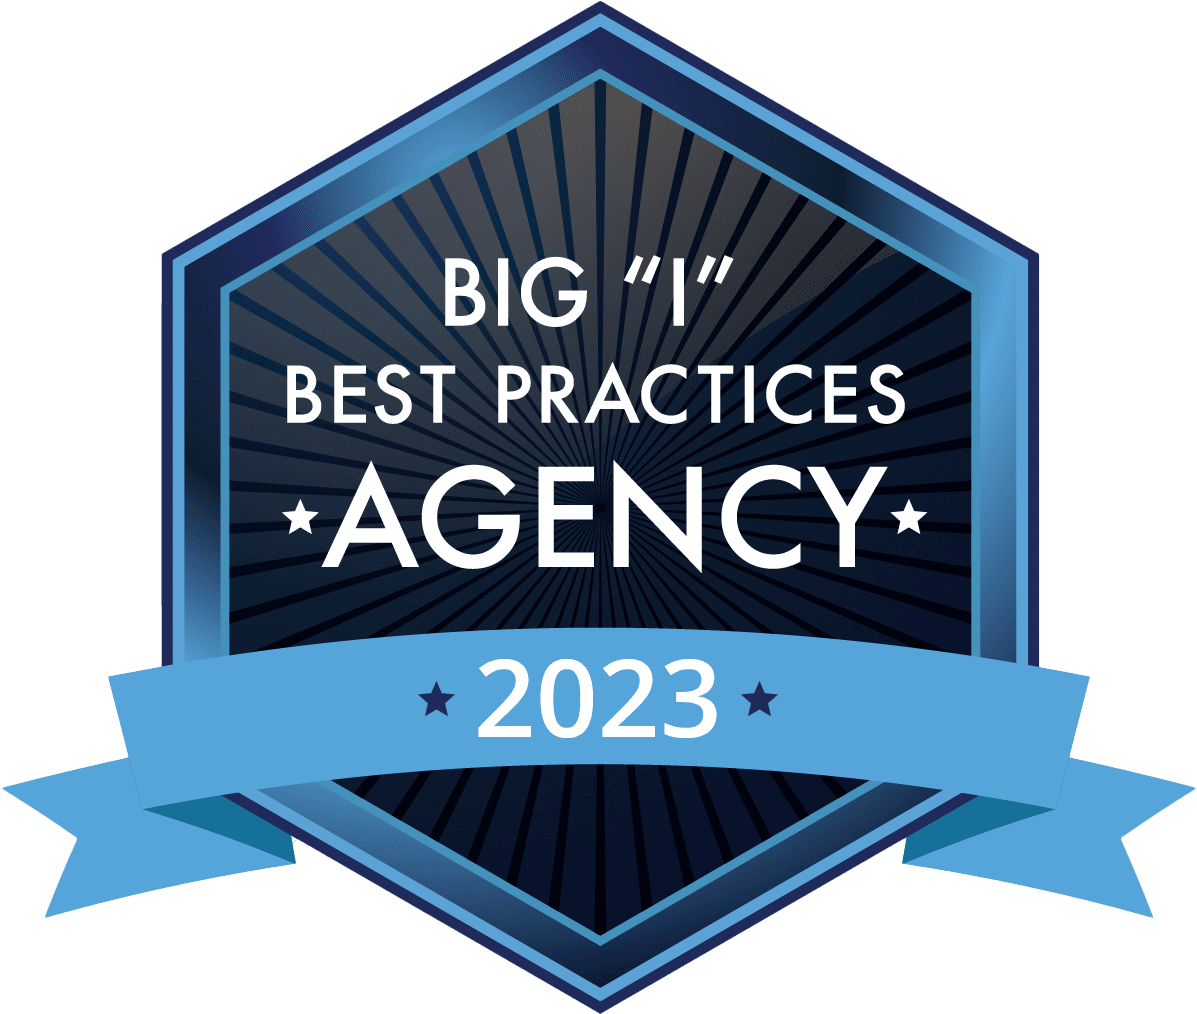 Energy Insurance Agency - Big I Best Practices Agency 2023